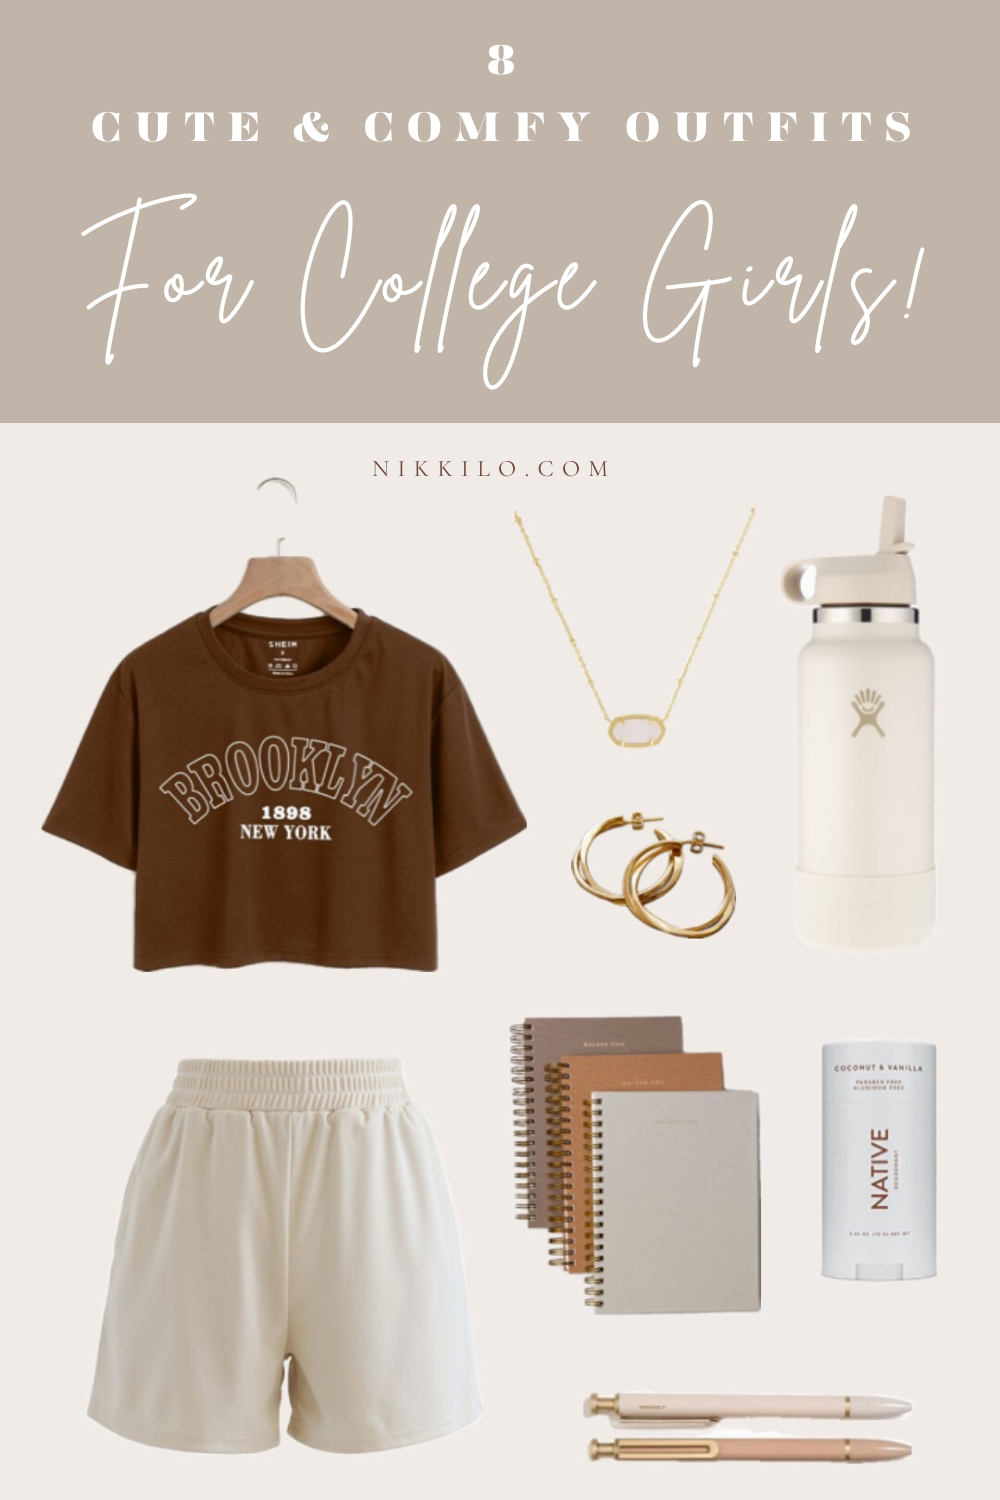 8 Comfy Outfits For School (That STILL Look Insanely Cute!) — Nikki Lo